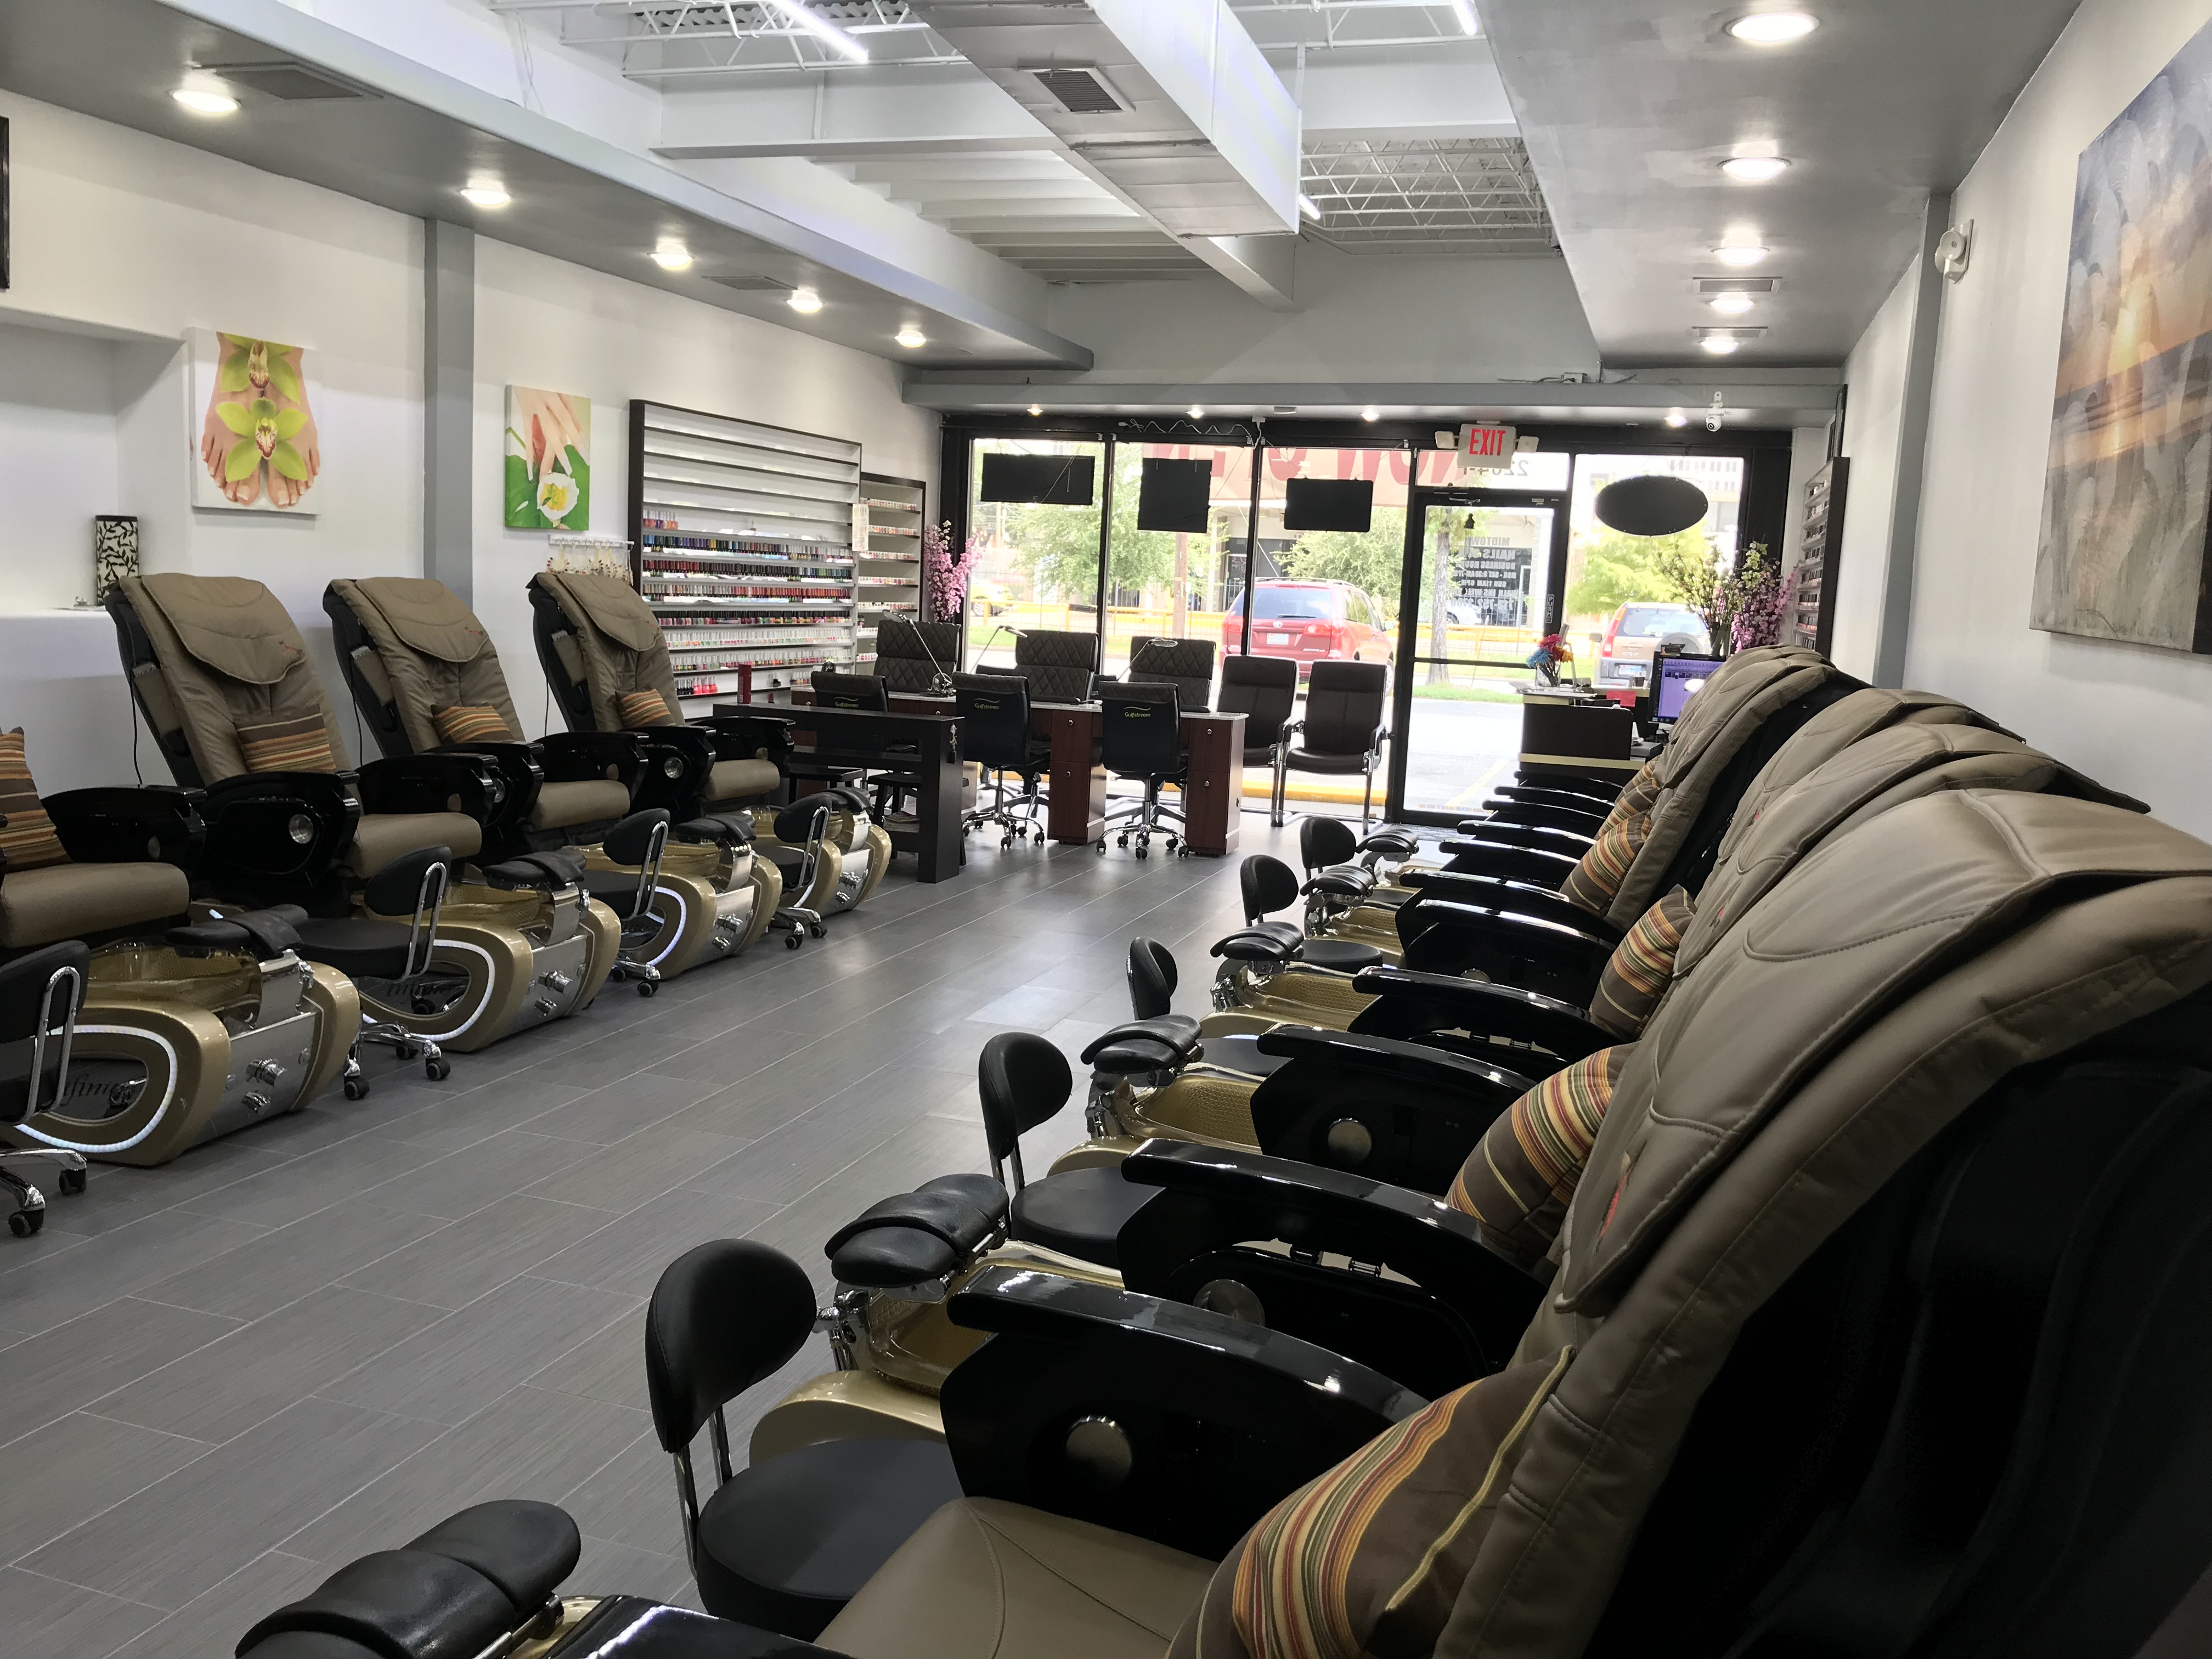 Spa chairs and manicure tables